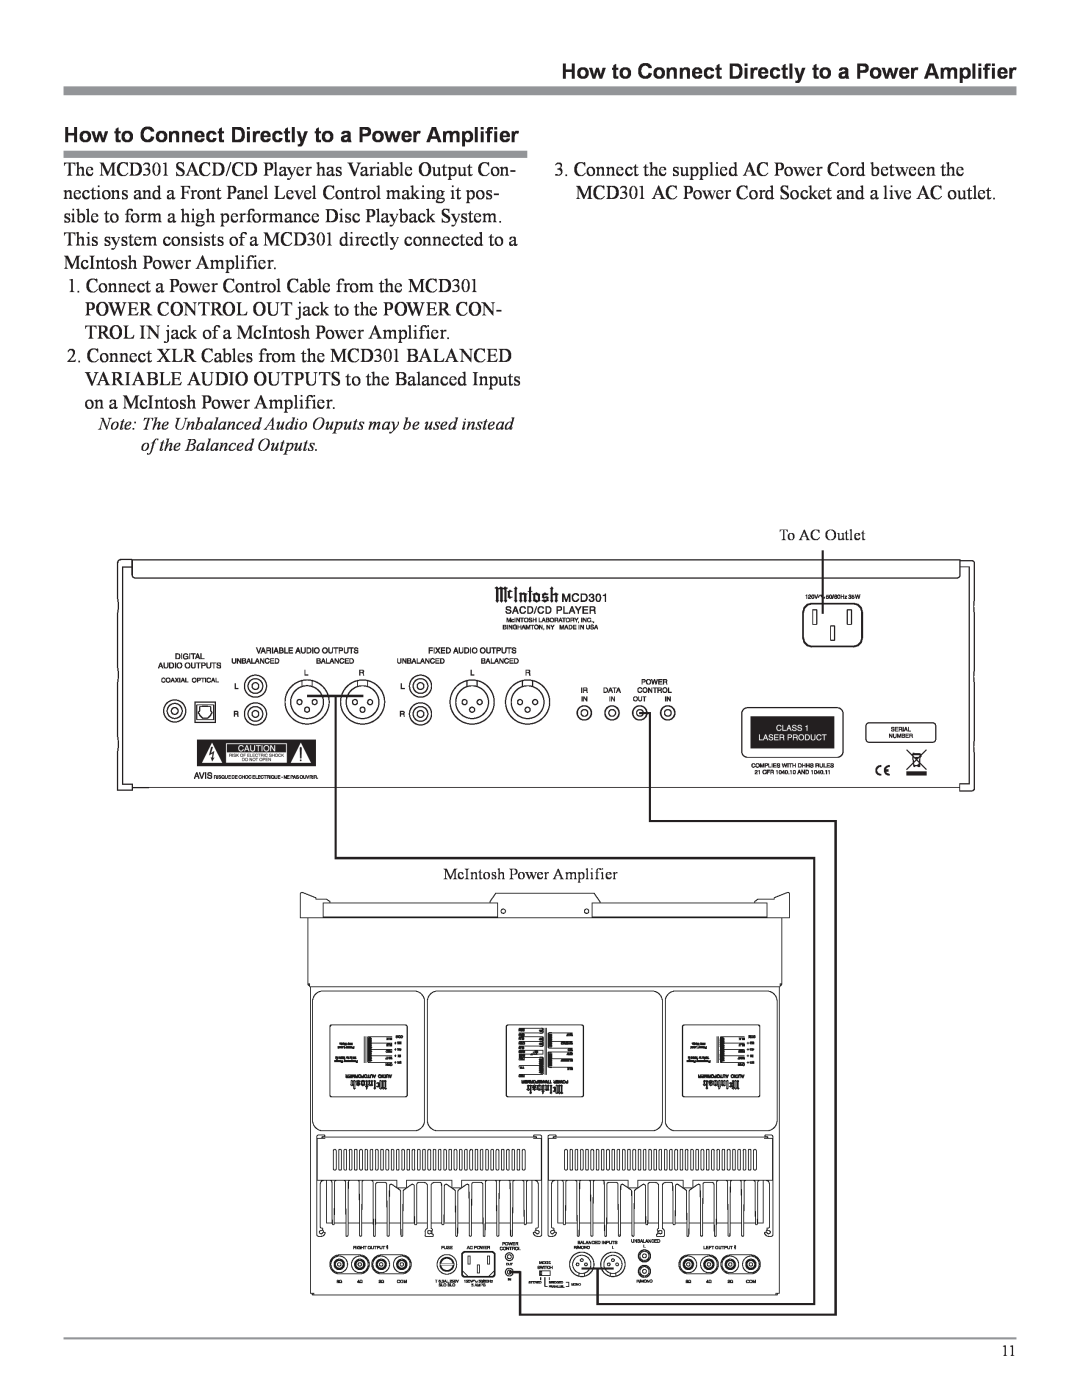 McIntosh MCD301 owner manual How to Connect Directly to a Power Amplifier, To AC Outlet McIntosh Power Amplifier 